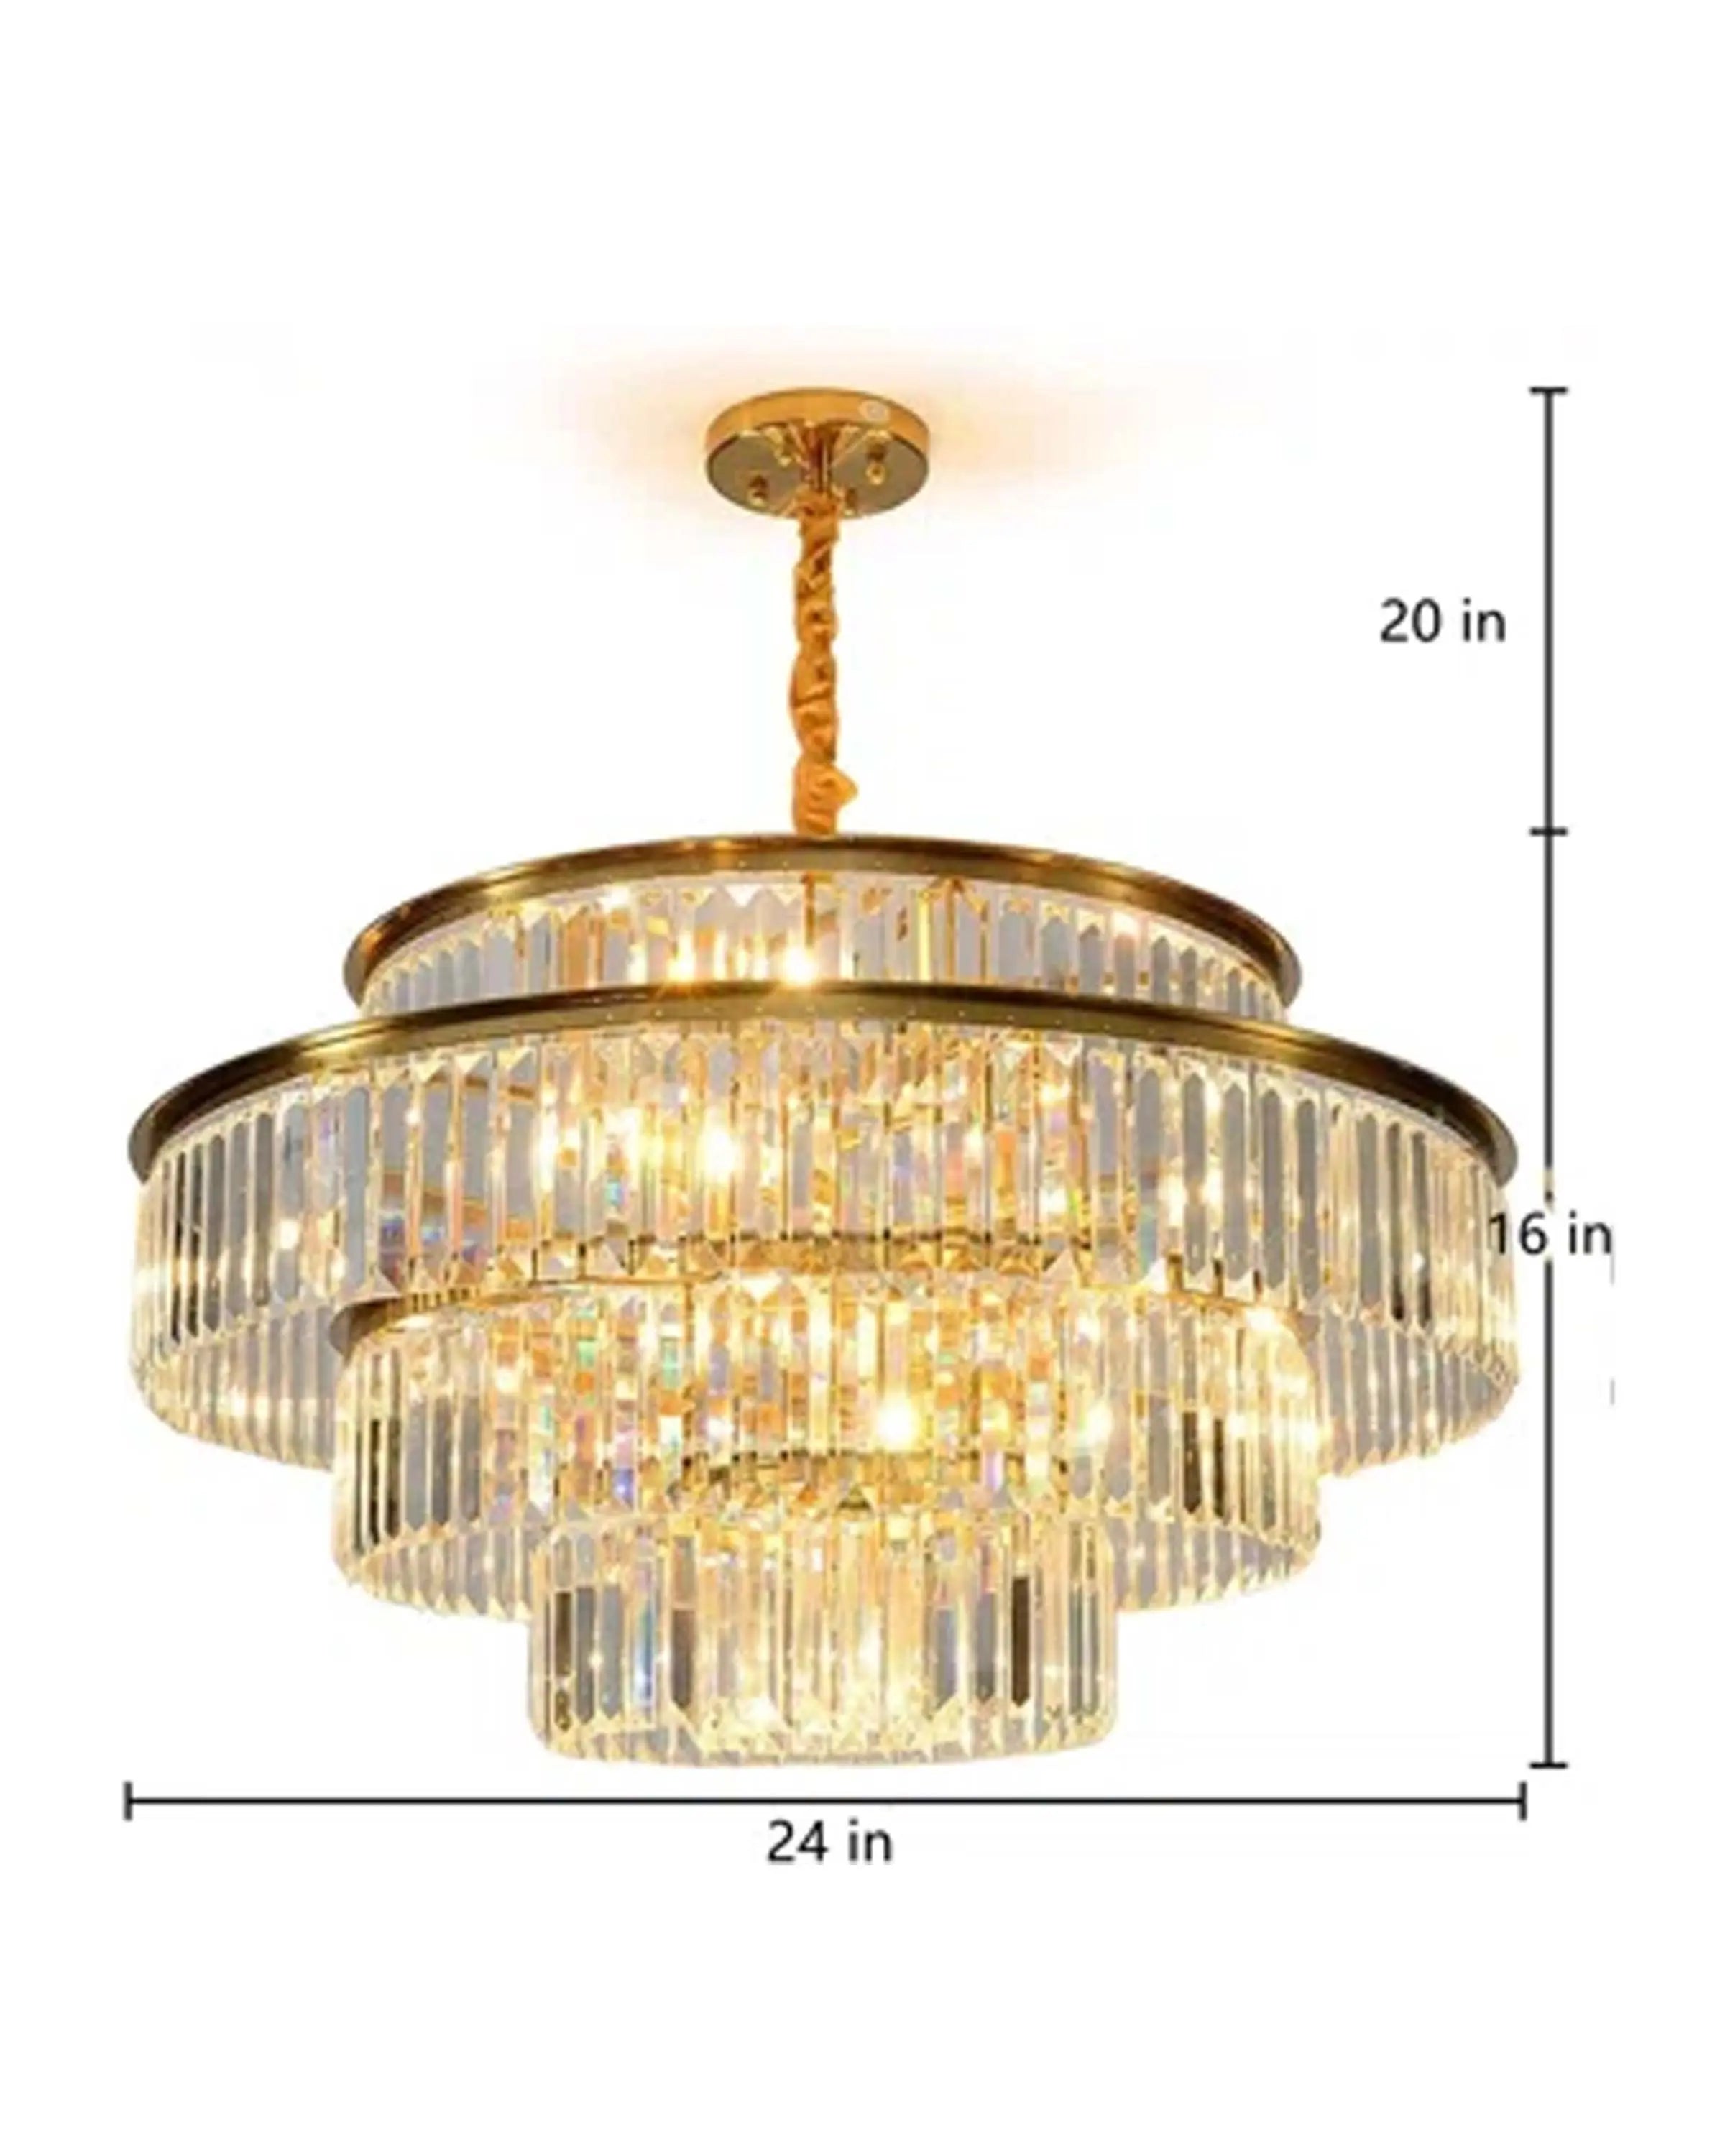 ELBRUS Classic Crystal Chandelier ANGIE HOMES